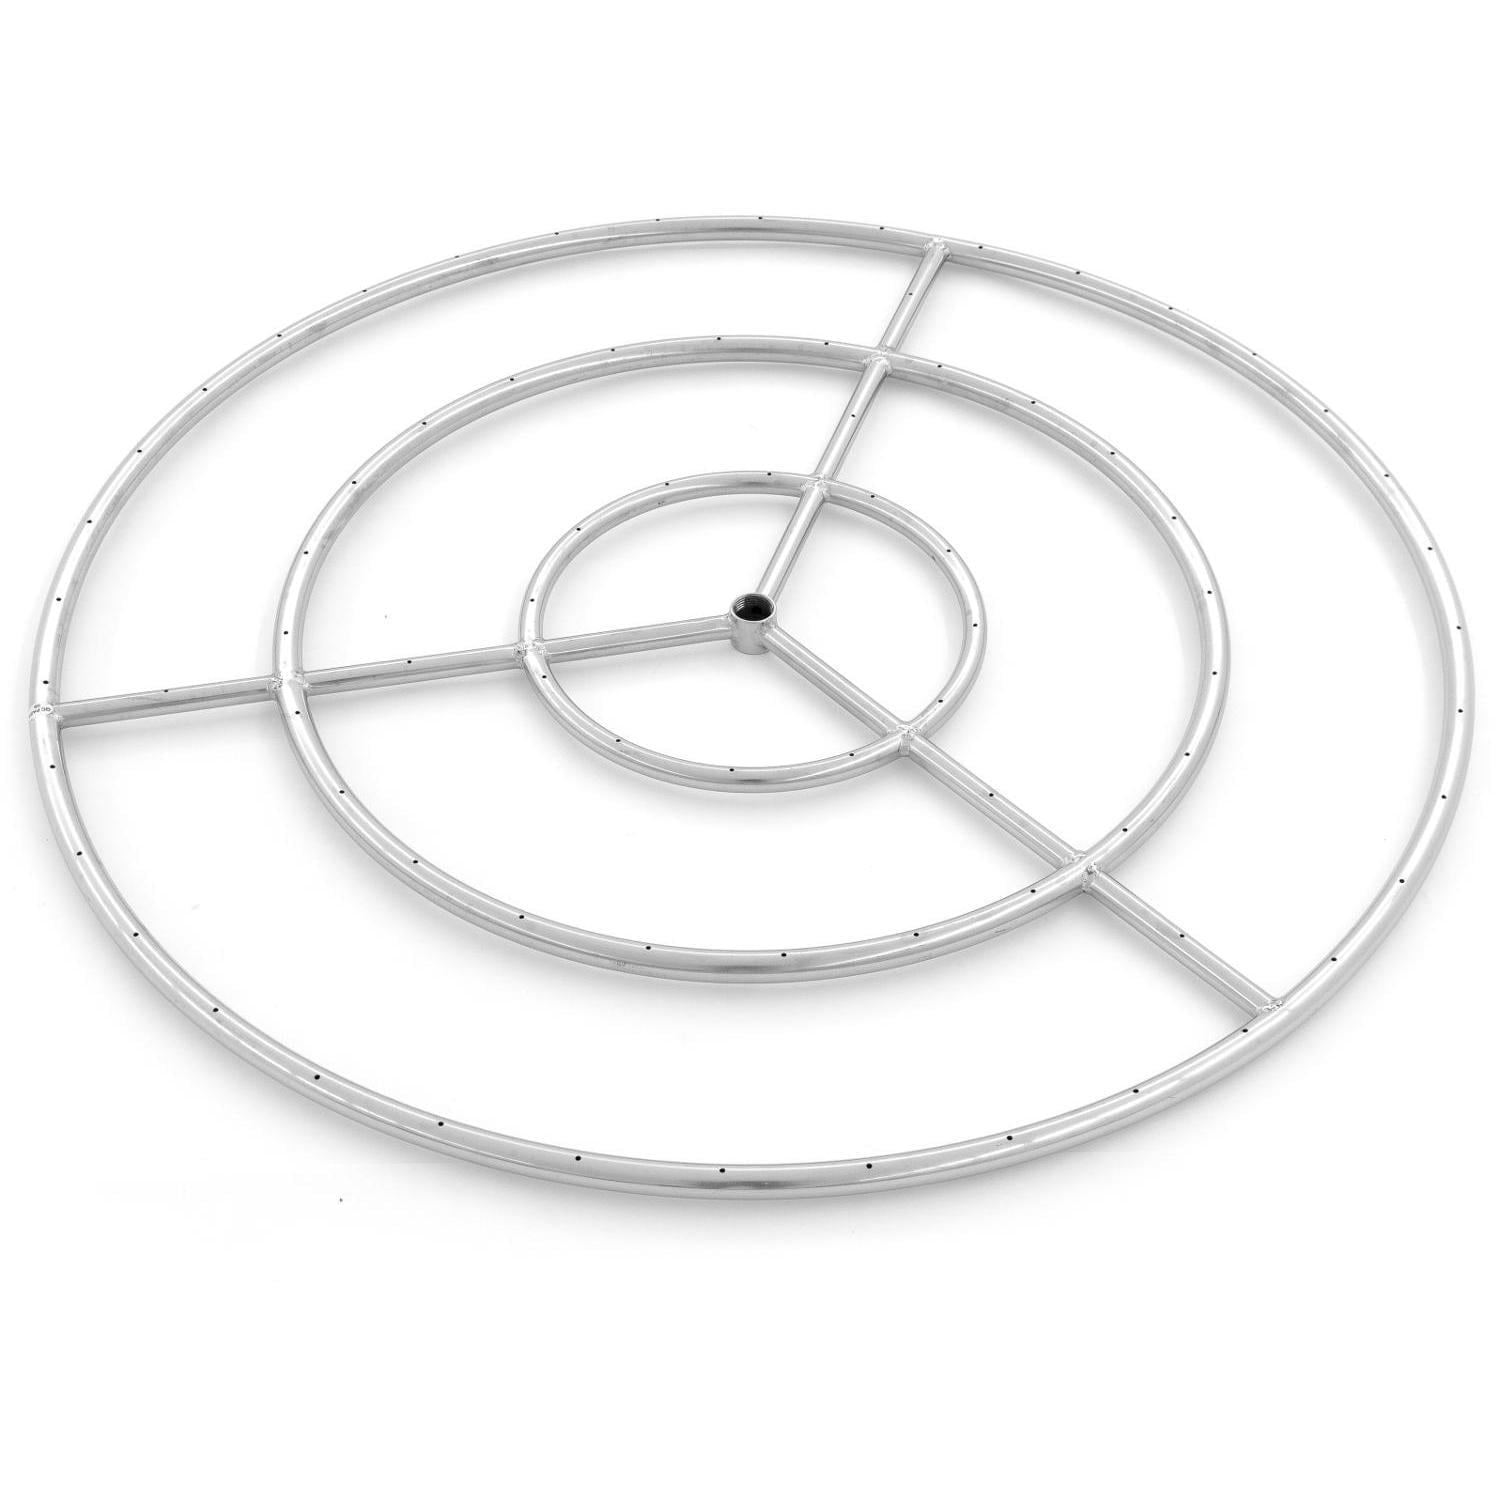 Natural Gas Triple Ring Burner, 36 Stainless Steel Fire Pit Ring